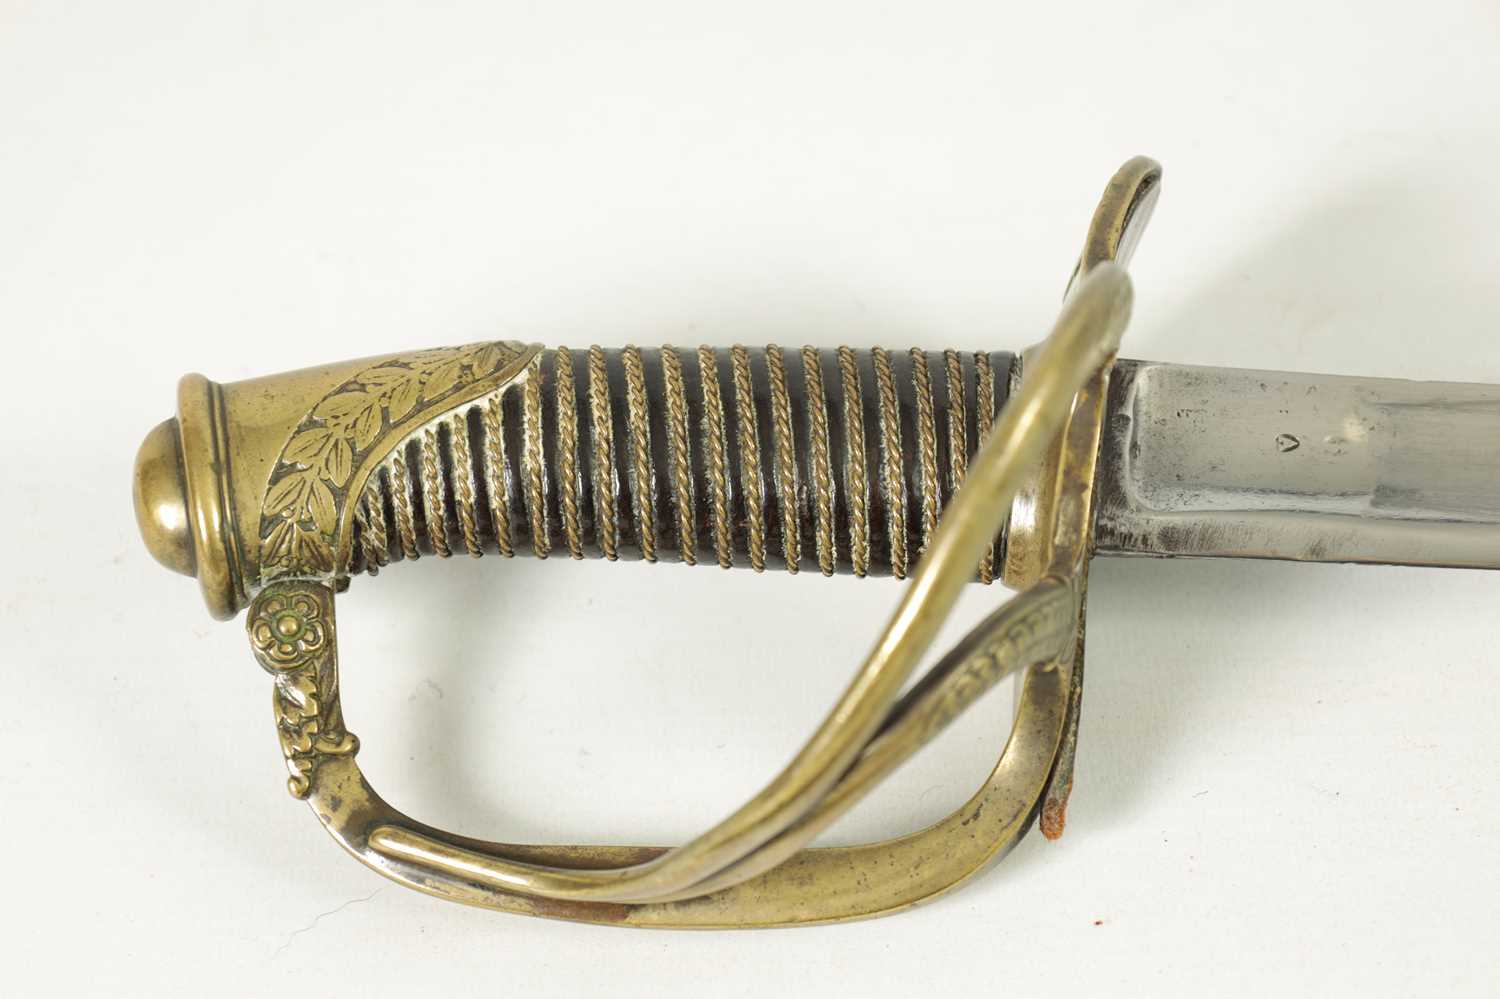 A 19TH CENTURY FRENCH CAVALRY SWORD - Image 5 of 8